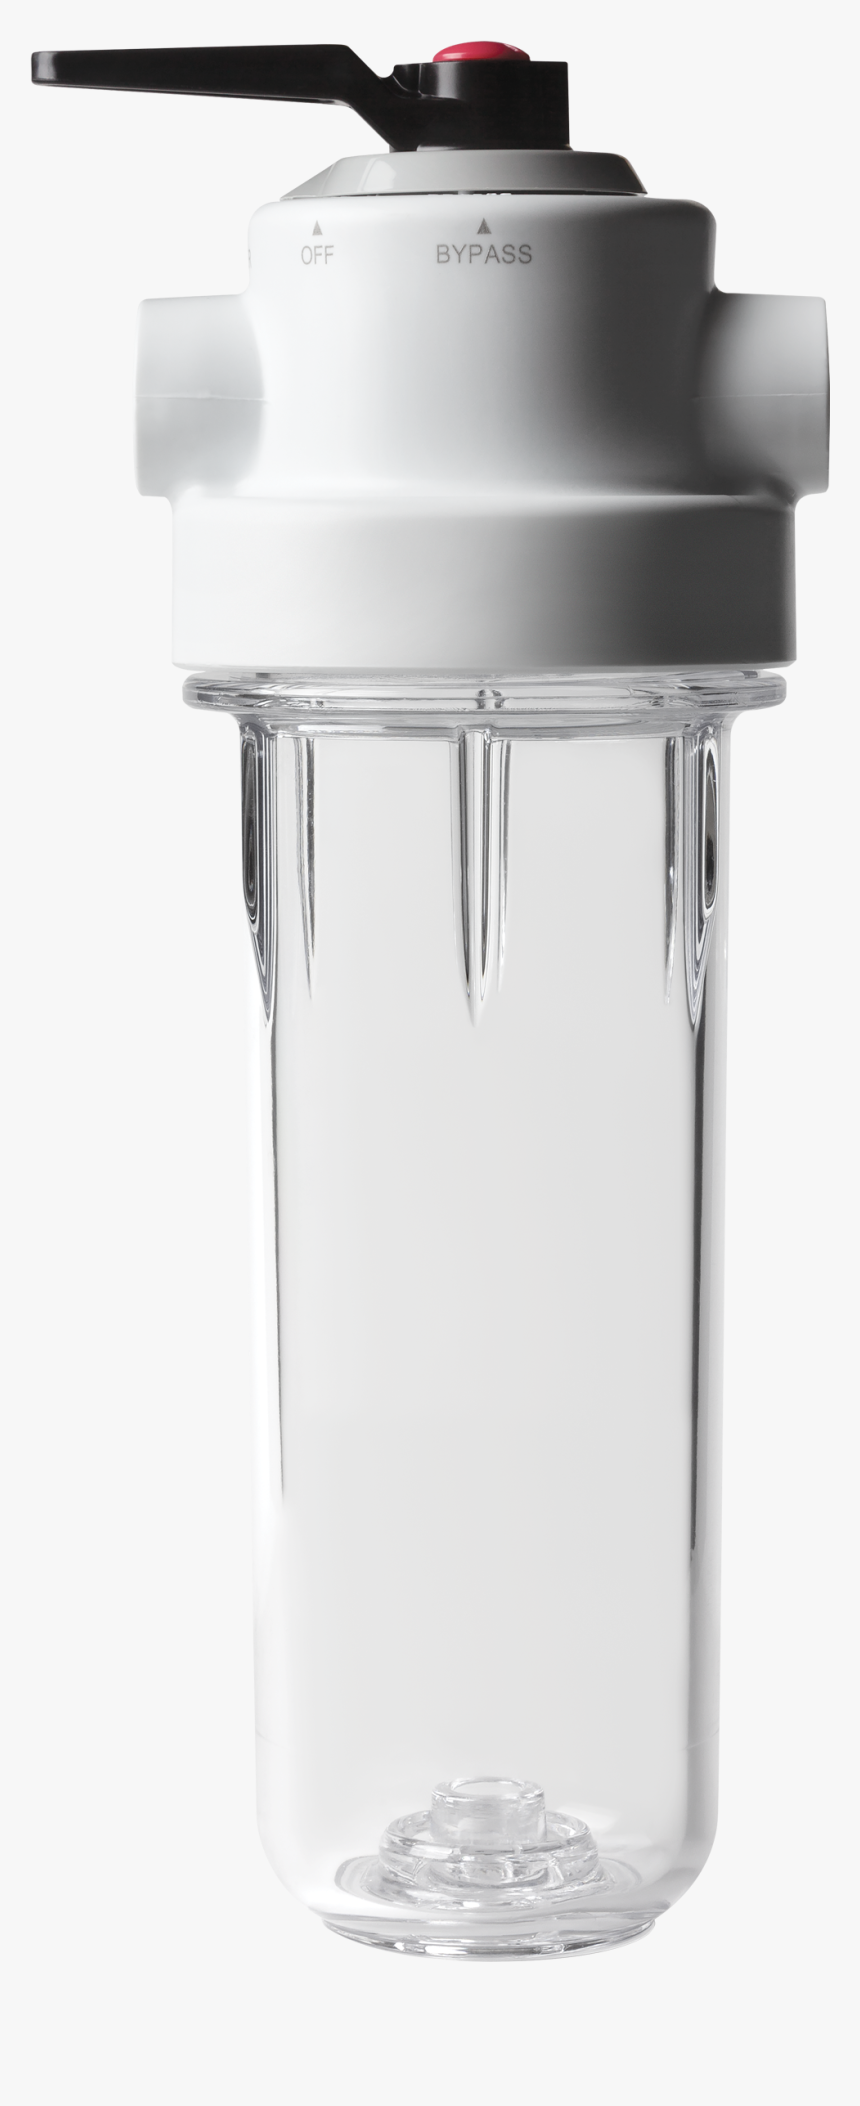 Product Image - Ao Smith Water Filters, HD Png Download, Free Download